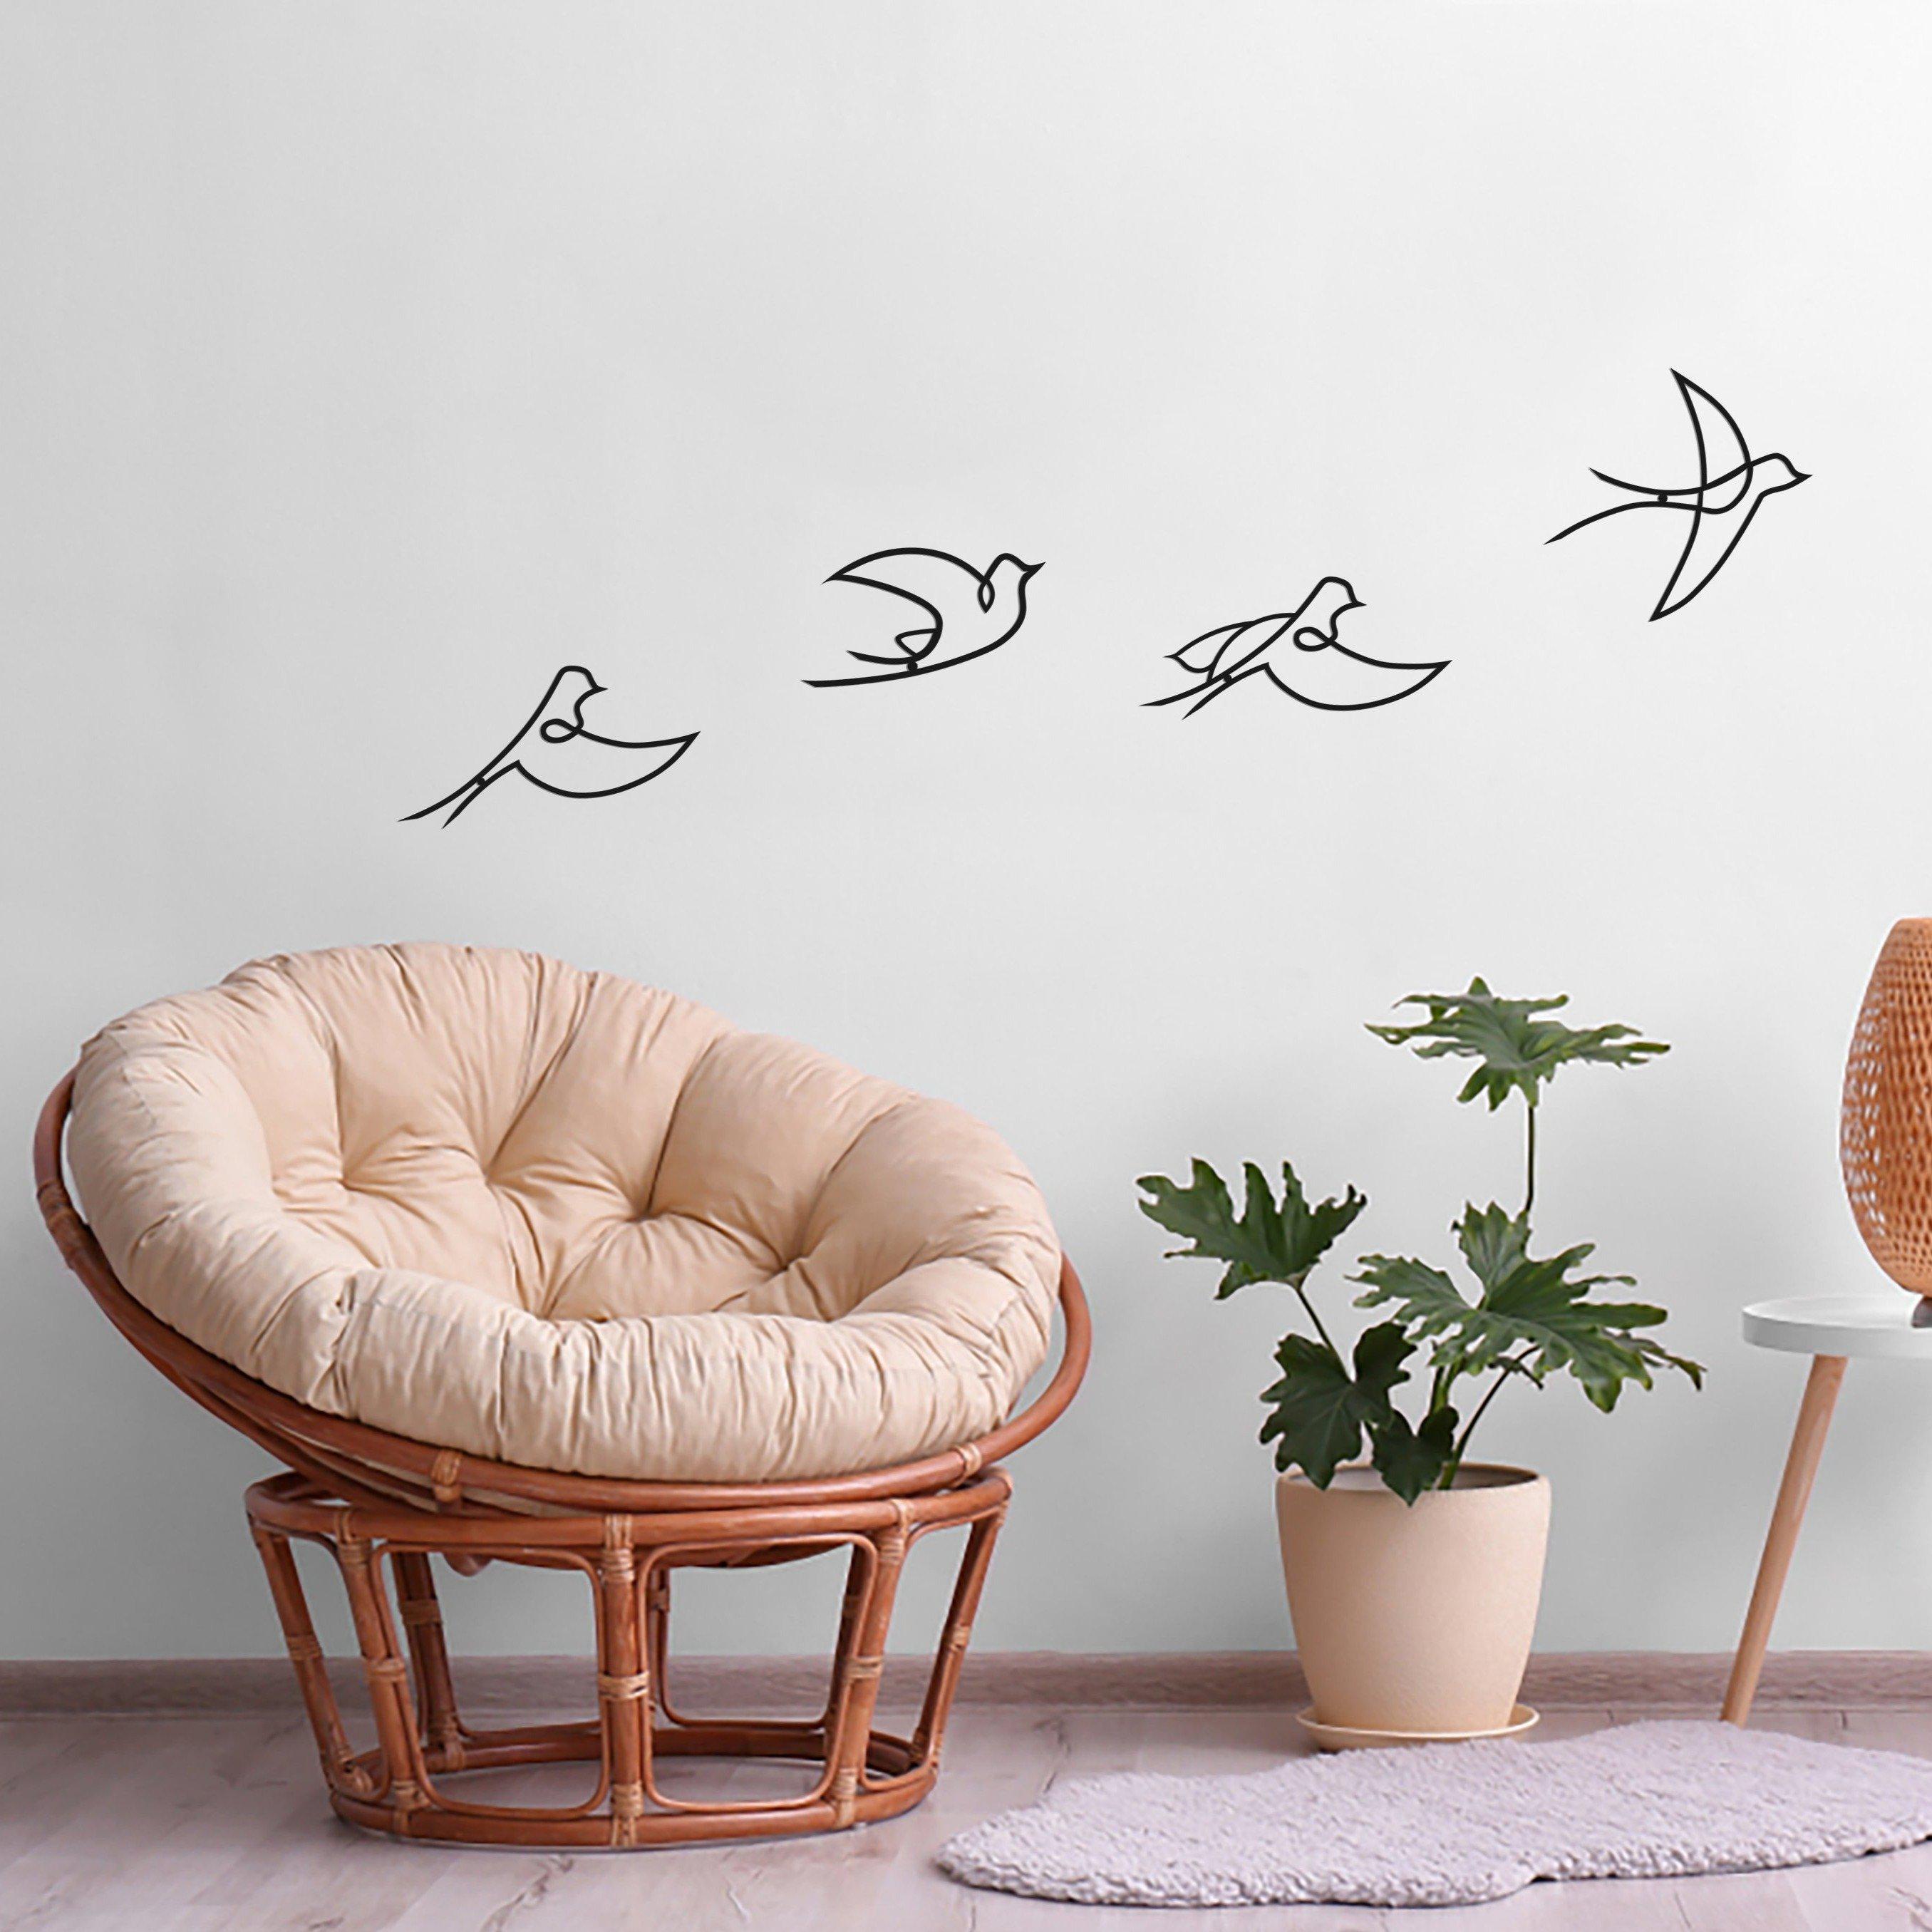 Wall Wall Set | Flying Archtwain – Art Metal Office Decor Home archtwain Sign Birds